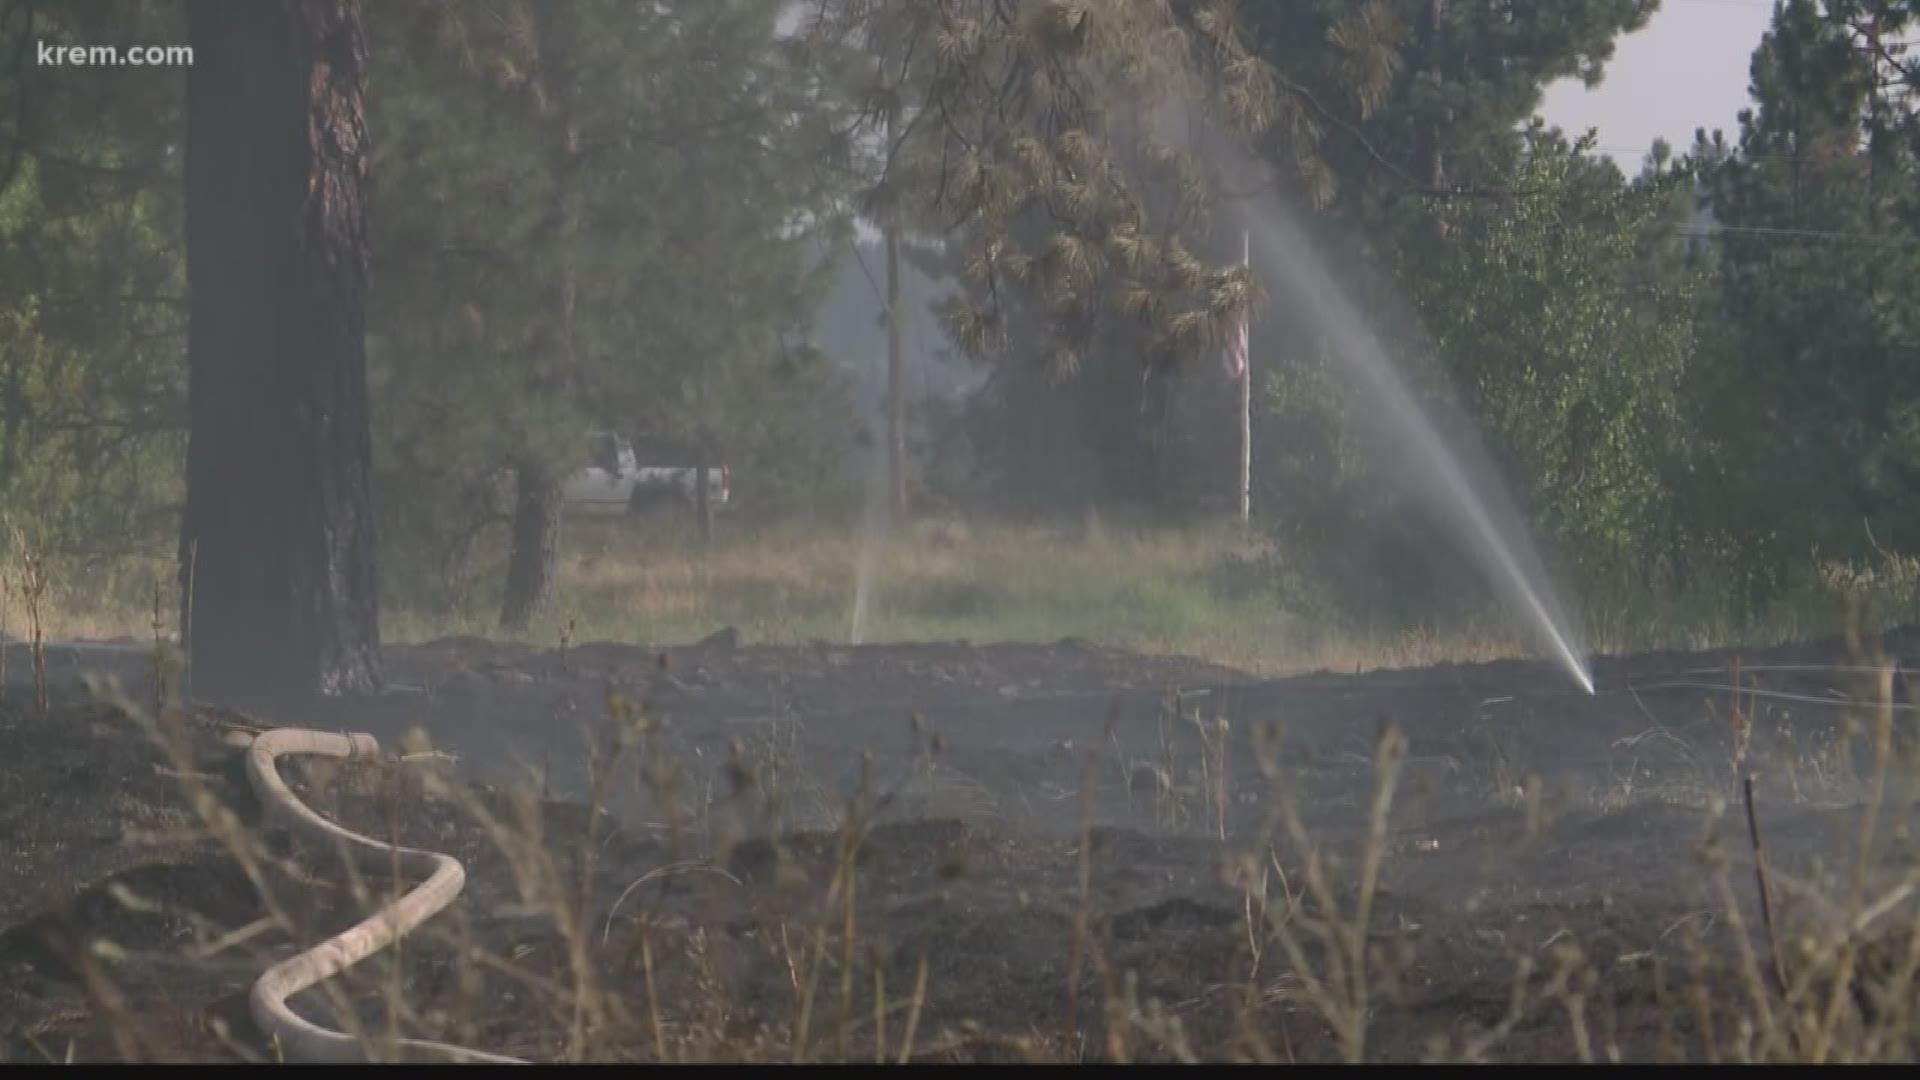 Brush fire in North Spokane 80 percent contained